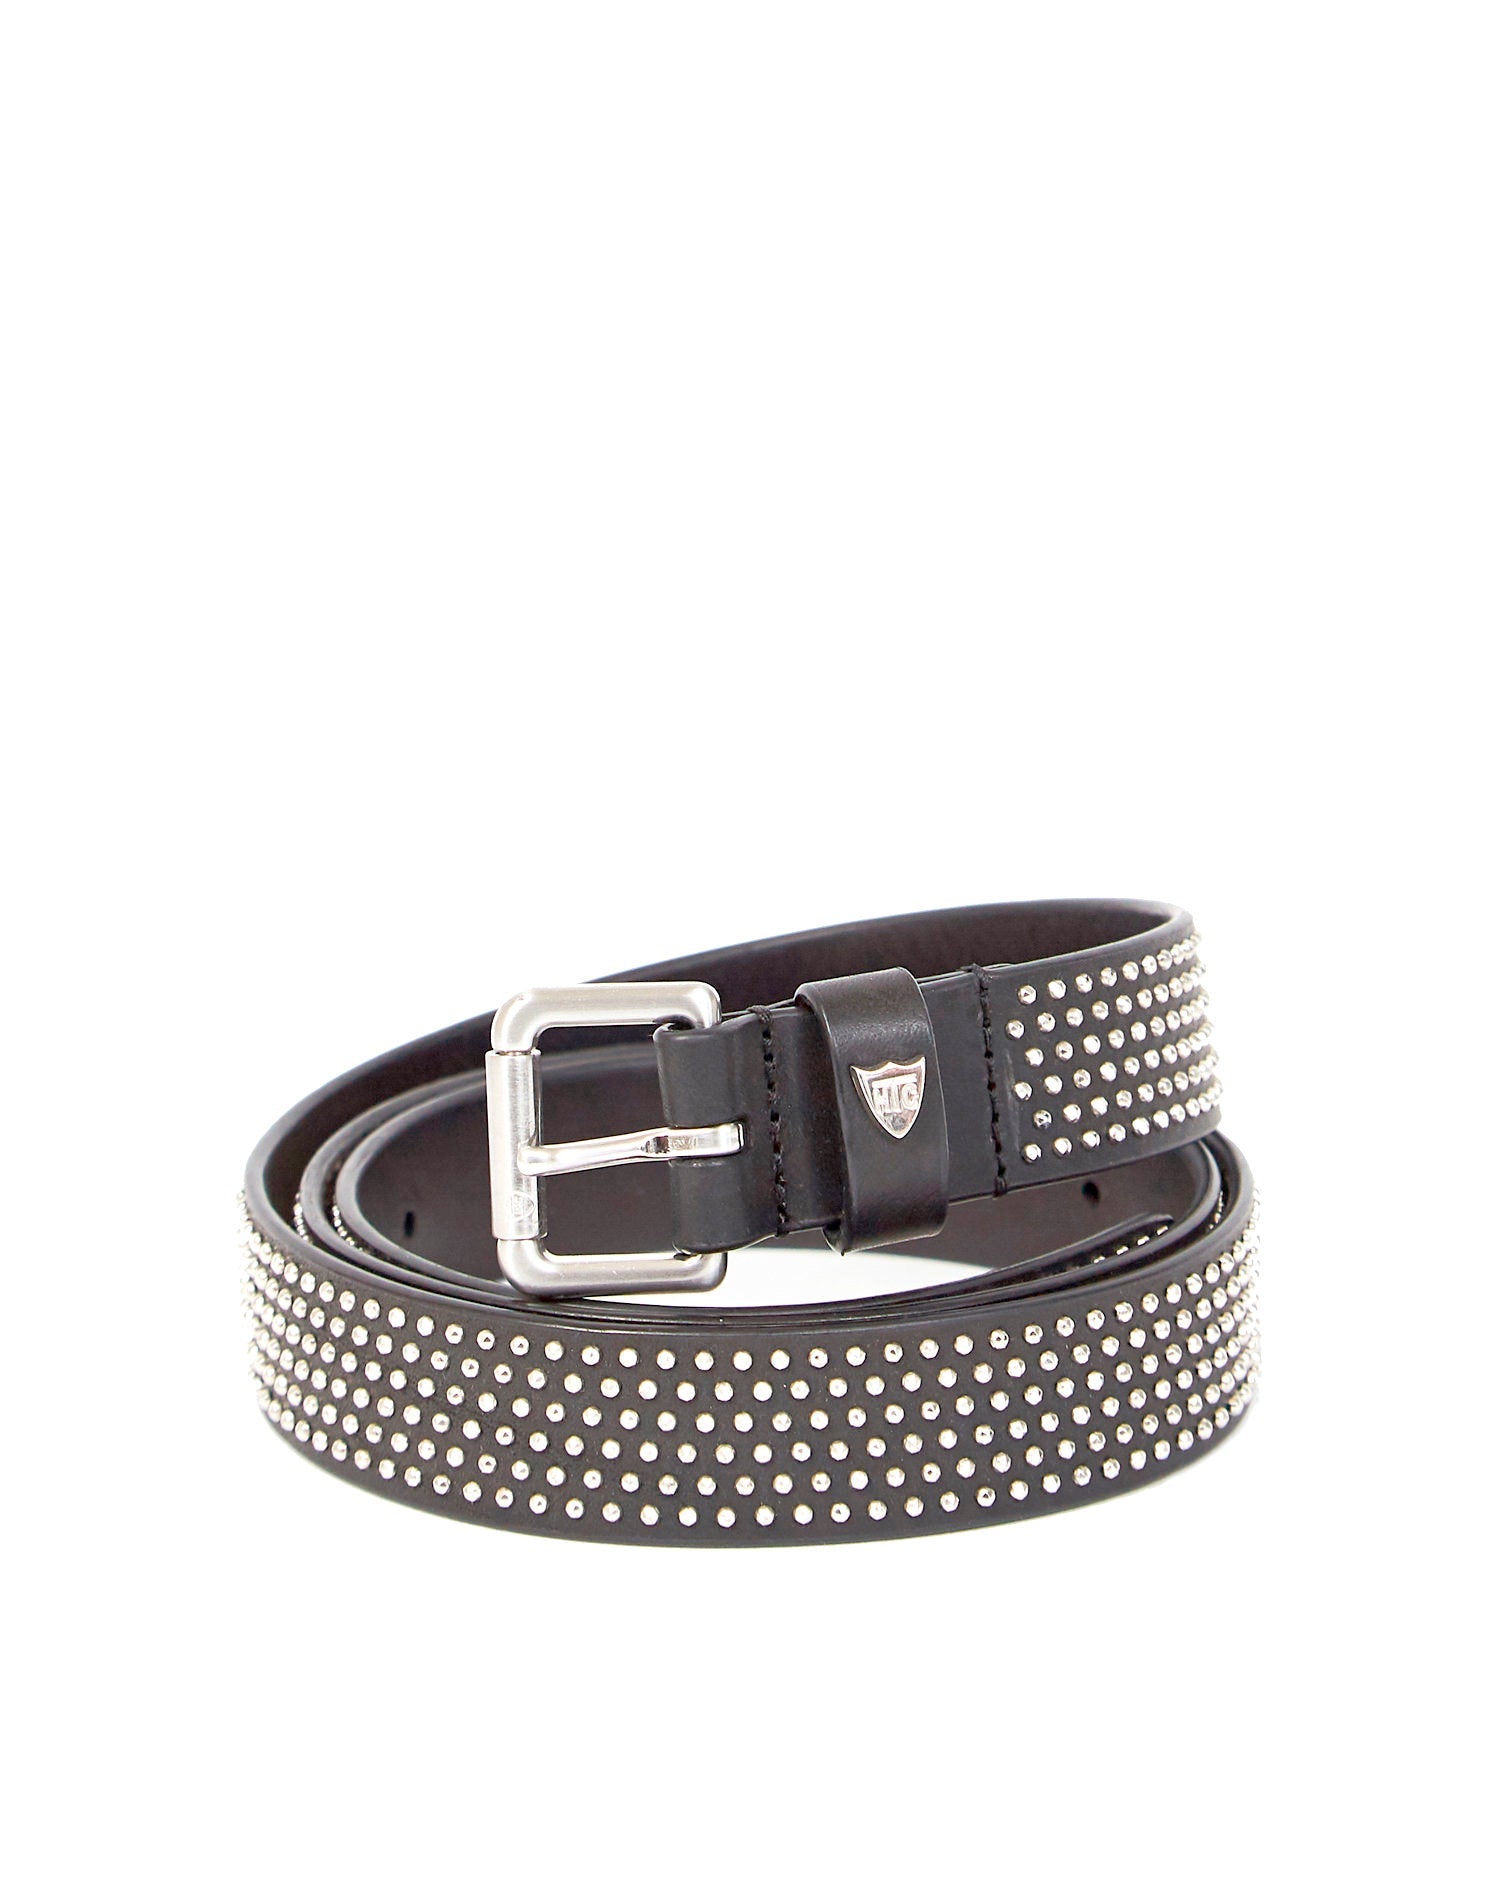 SOPHIA SLIM BELT Black leather belt with microstuds, buckle and belt loop in shiny metal. Height: 2,5 cm. Made in Italy. HTC LOS ANGELES